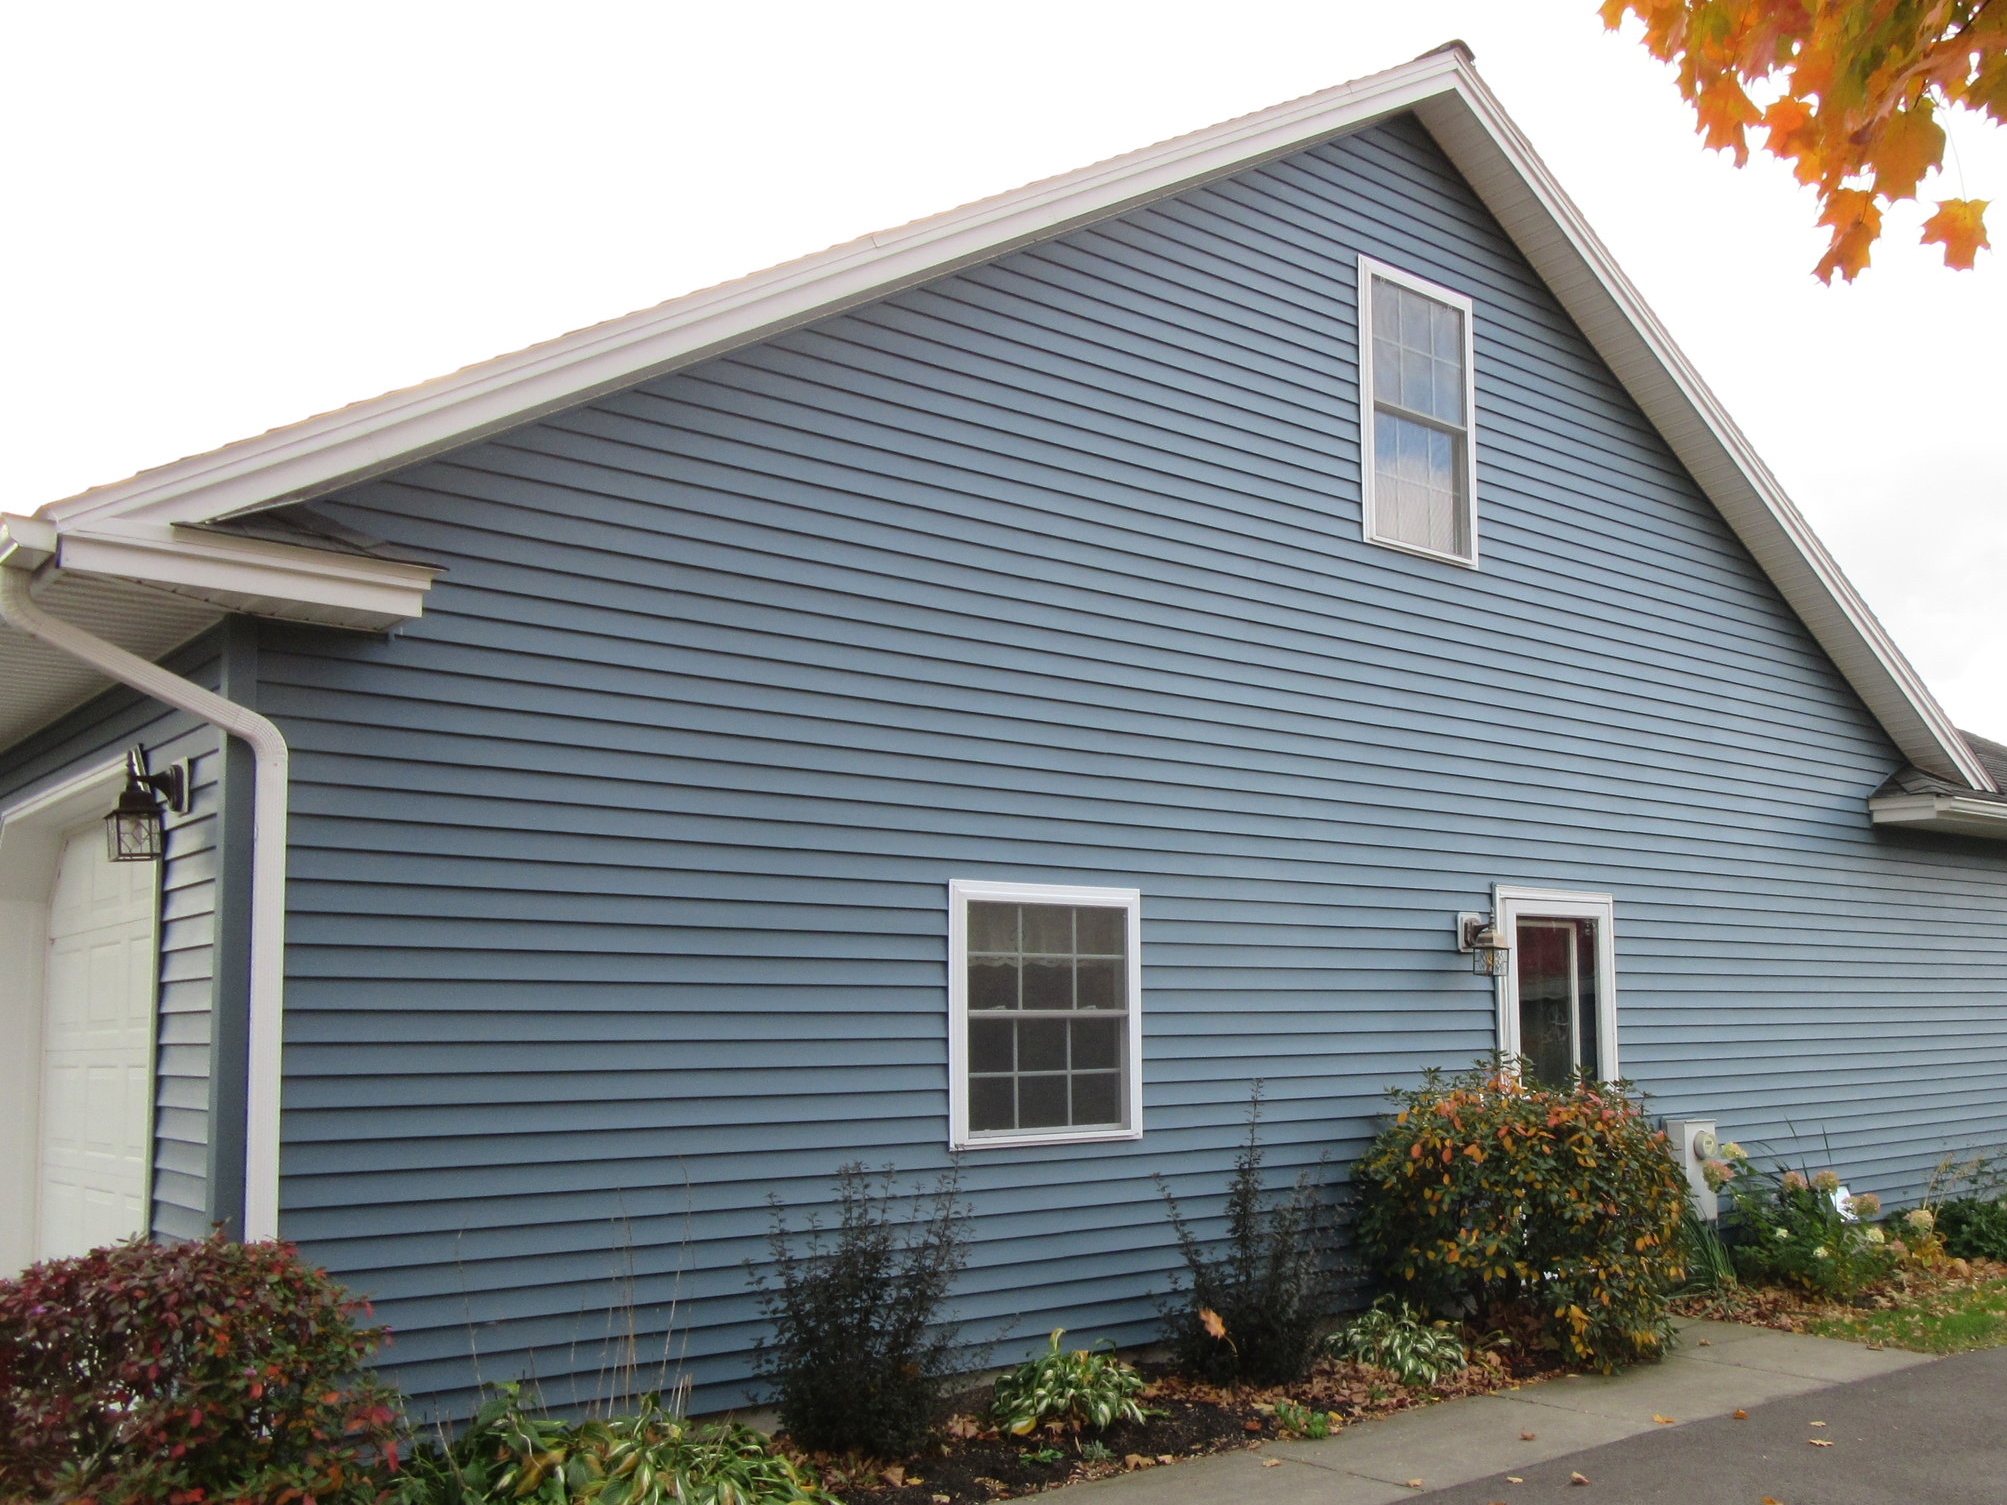 Tour of a vinyl siding project — Ernz Co. Painting